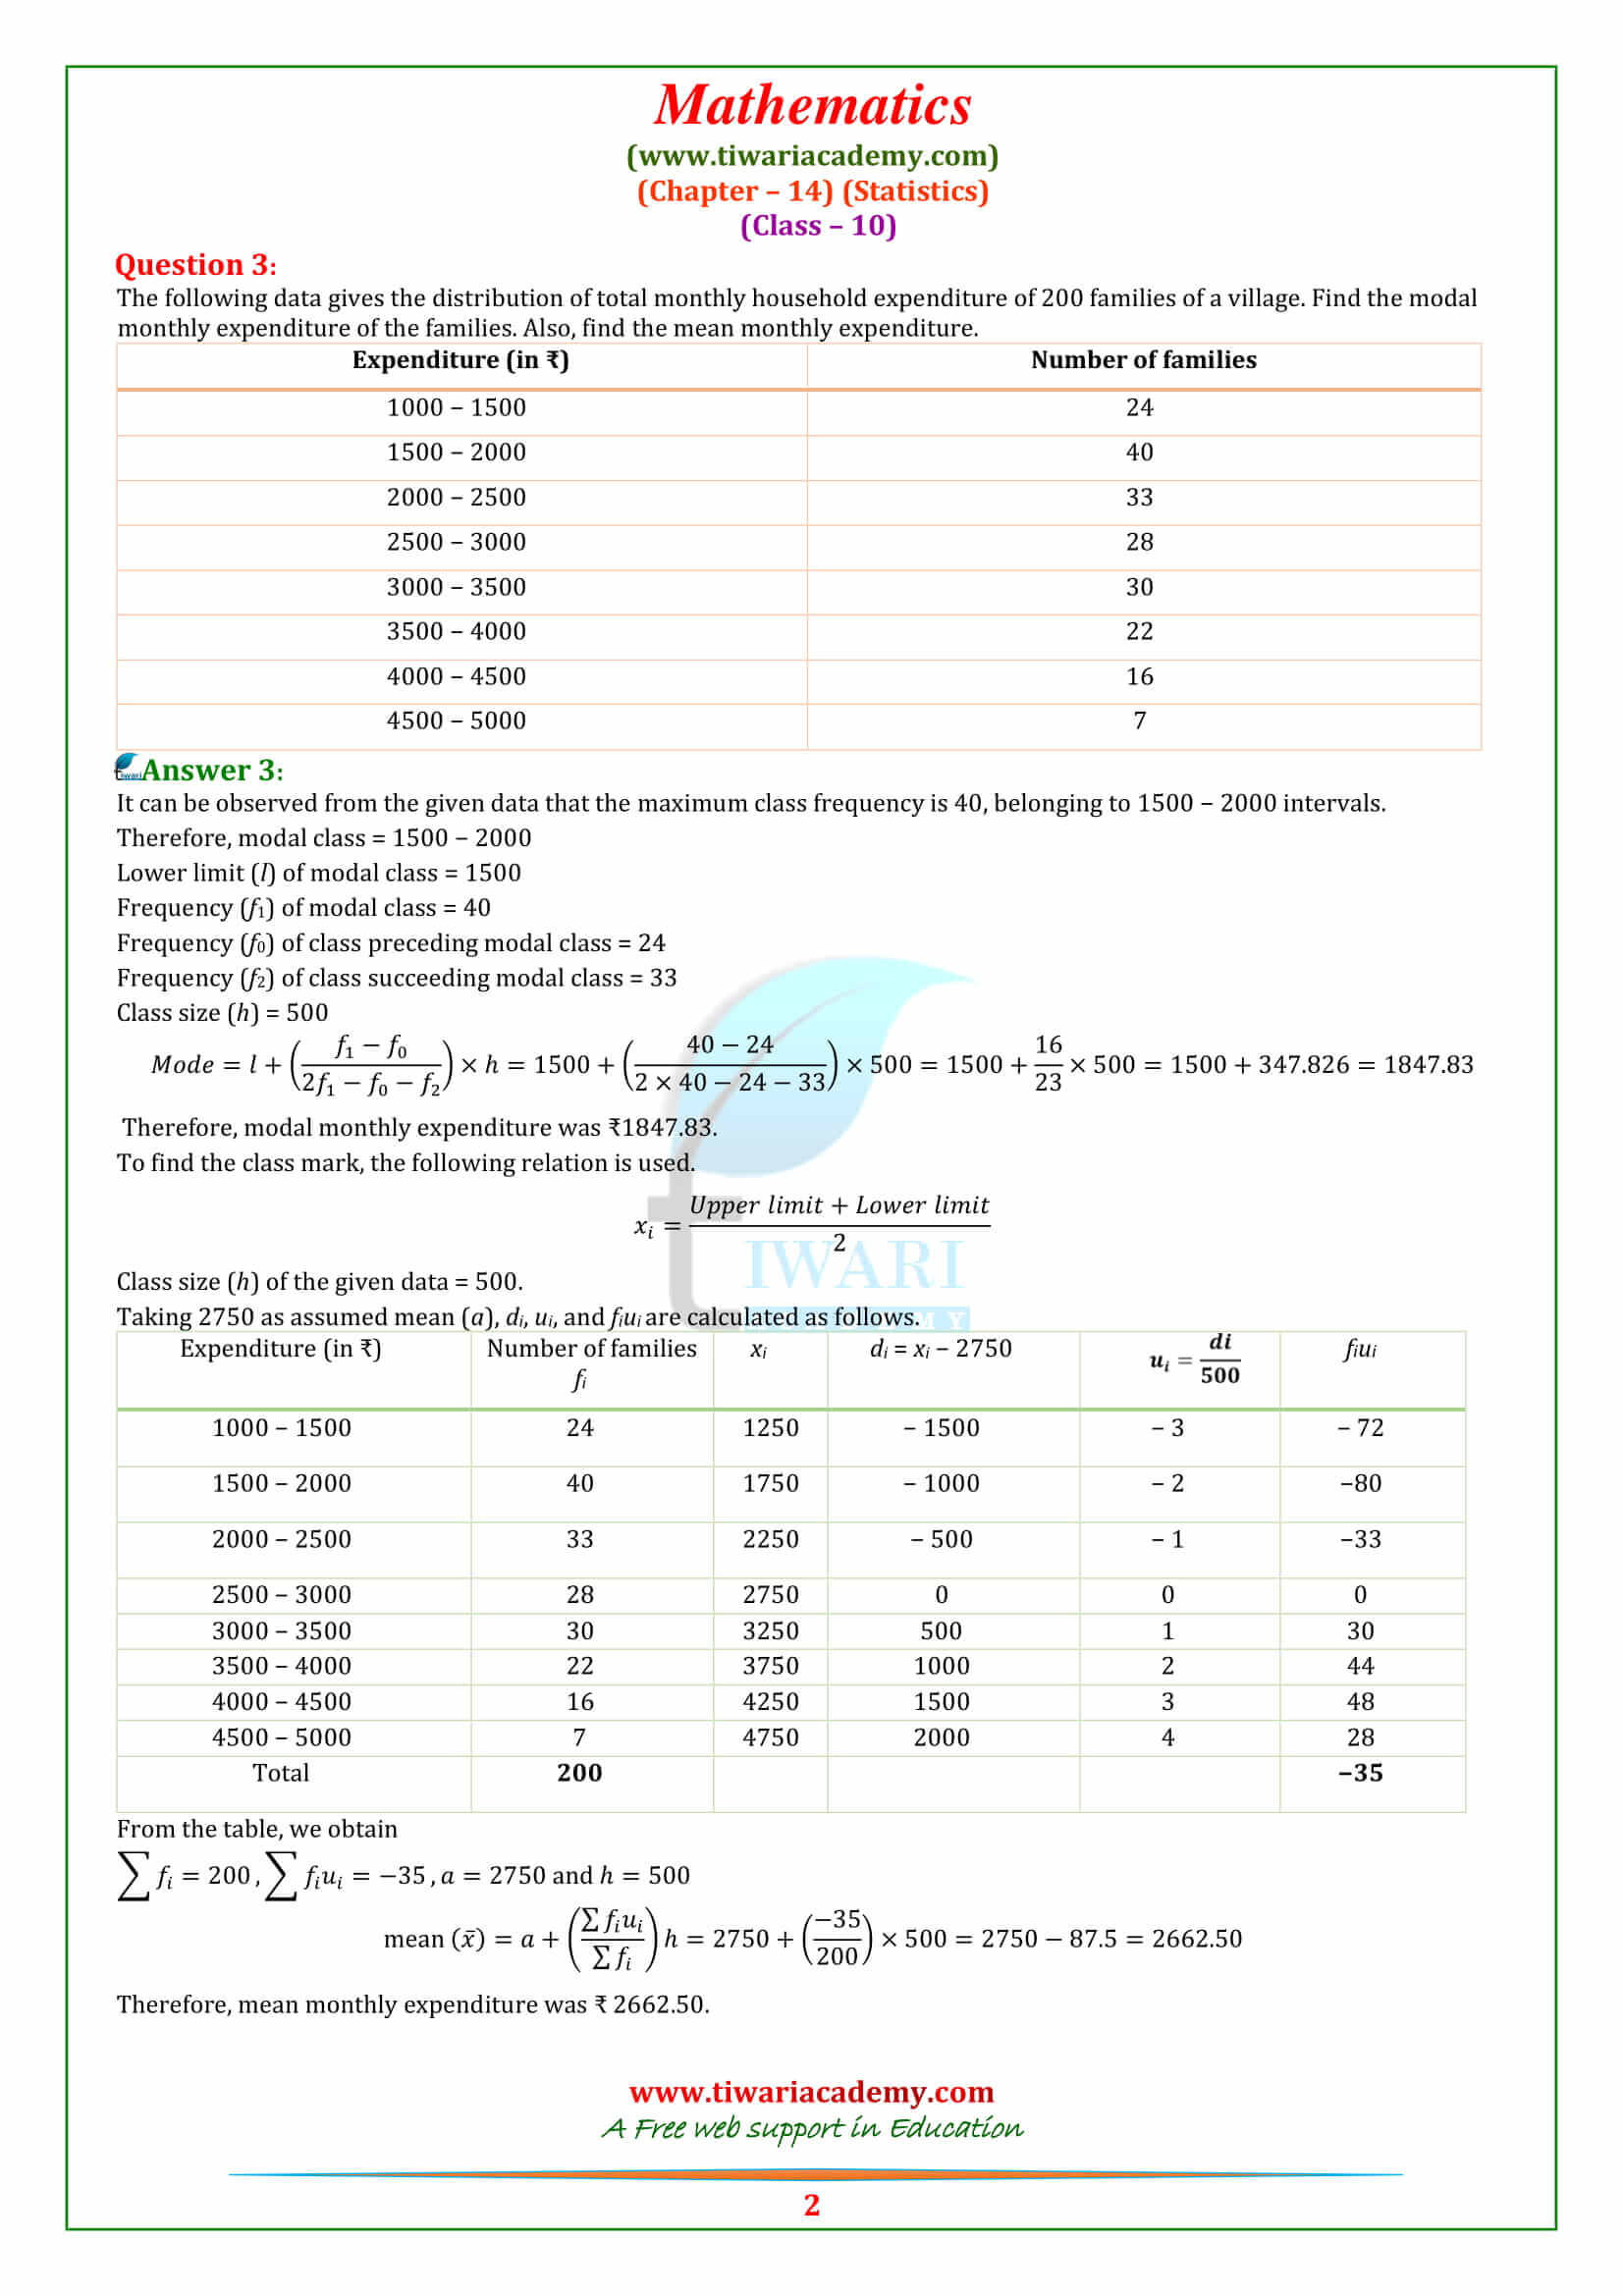 NCERT Solutions for class 10 Maths Chapter 14 Exercise 14.2 in pdf form